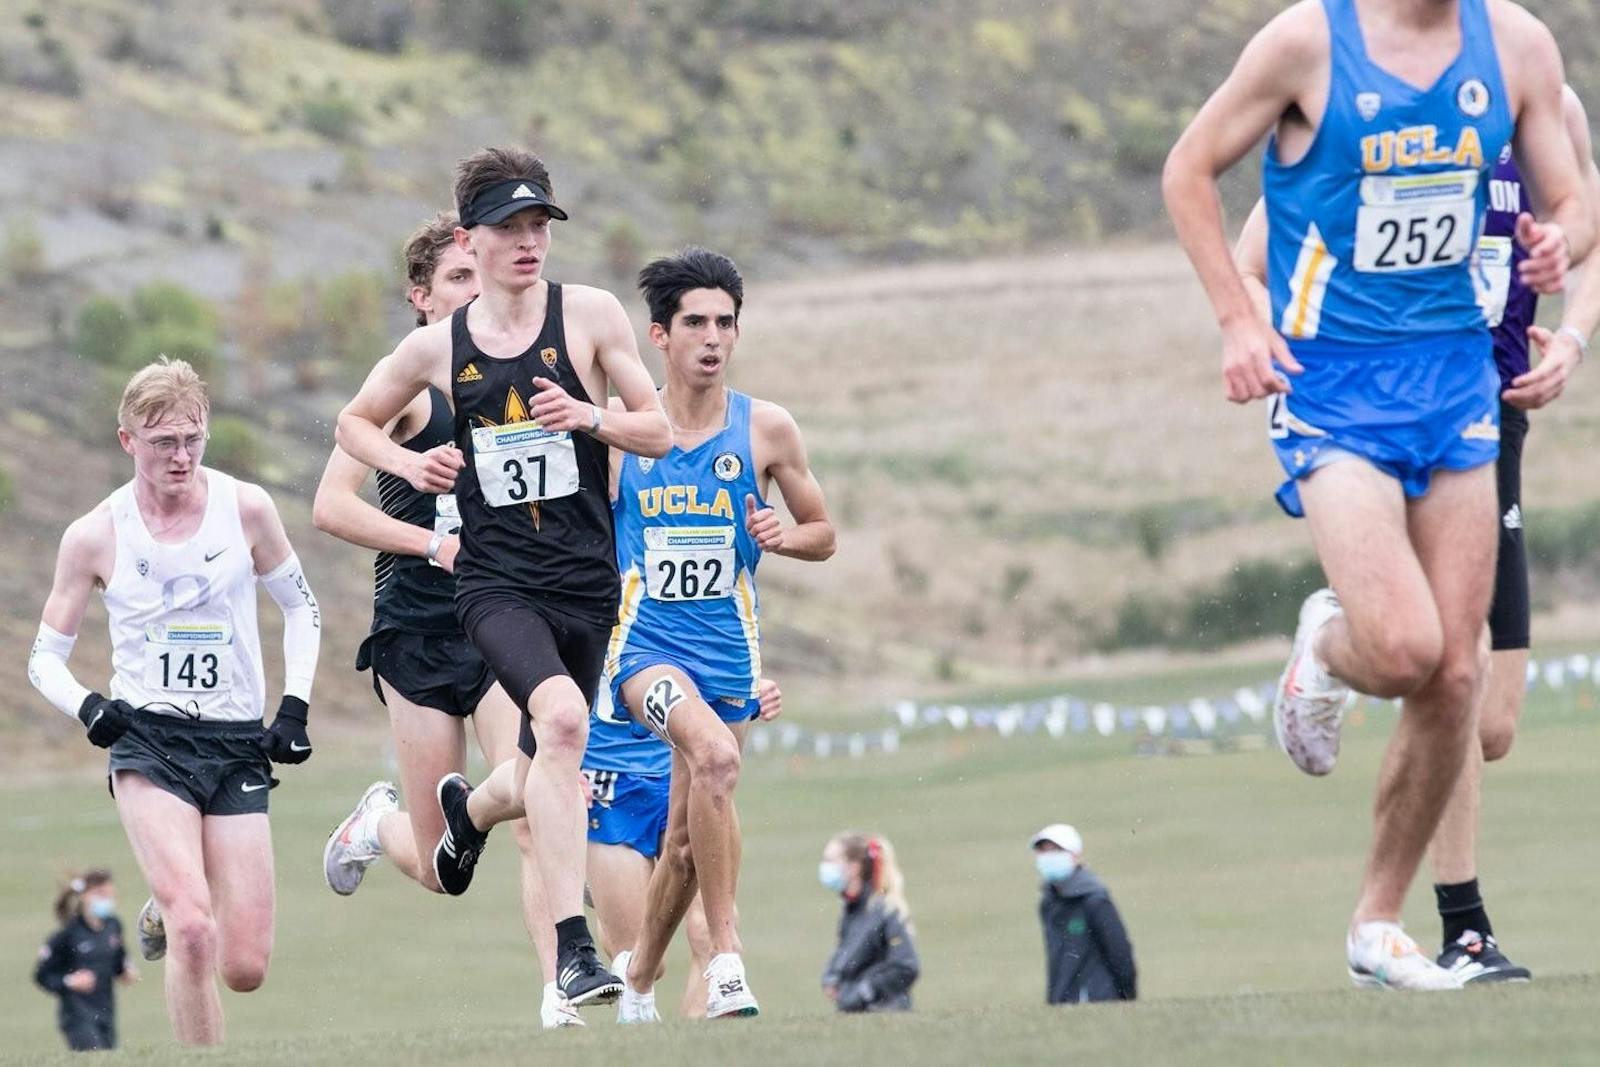 ASU cross country competes in first meet of season at UC Riverside